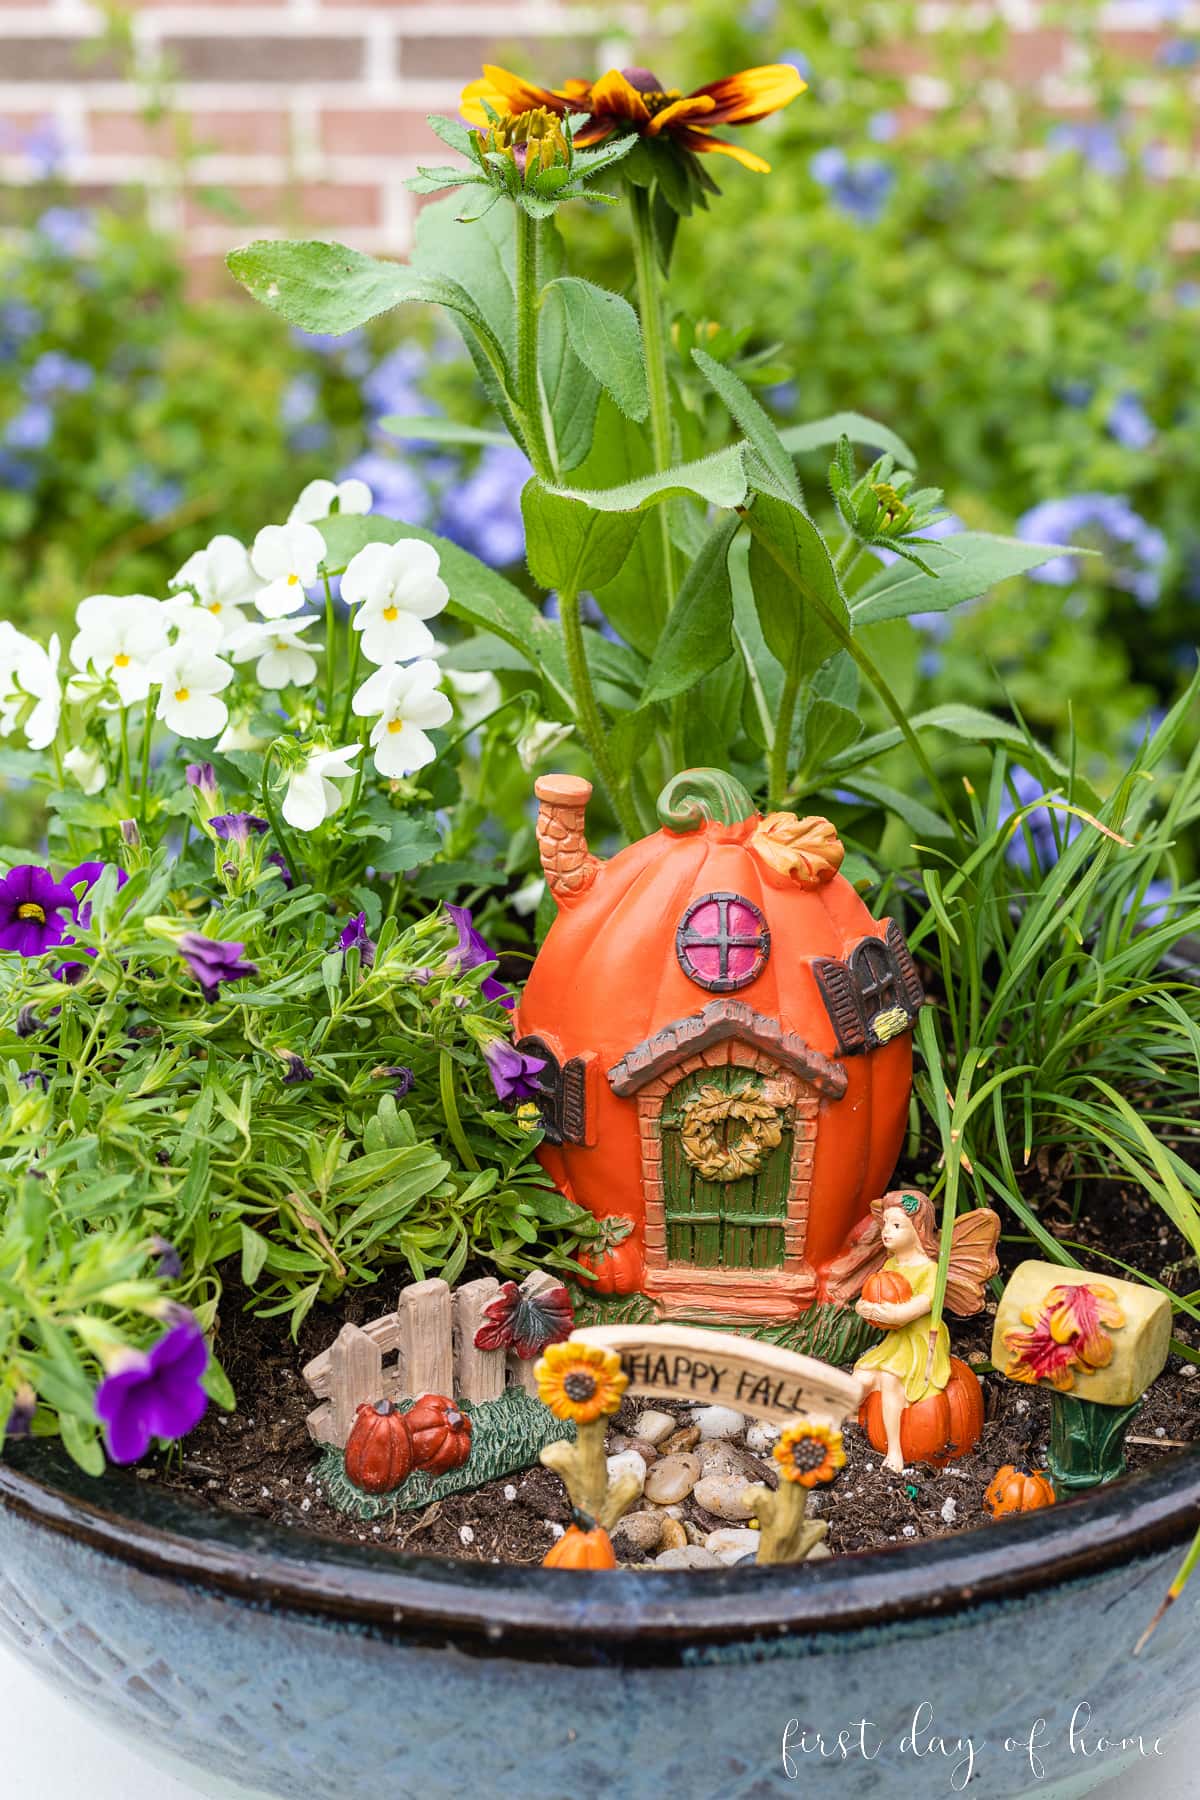 Fall fairy garden with figurines from Dollar Tree including a pumpkin house, fence, mailbox, and small fairy